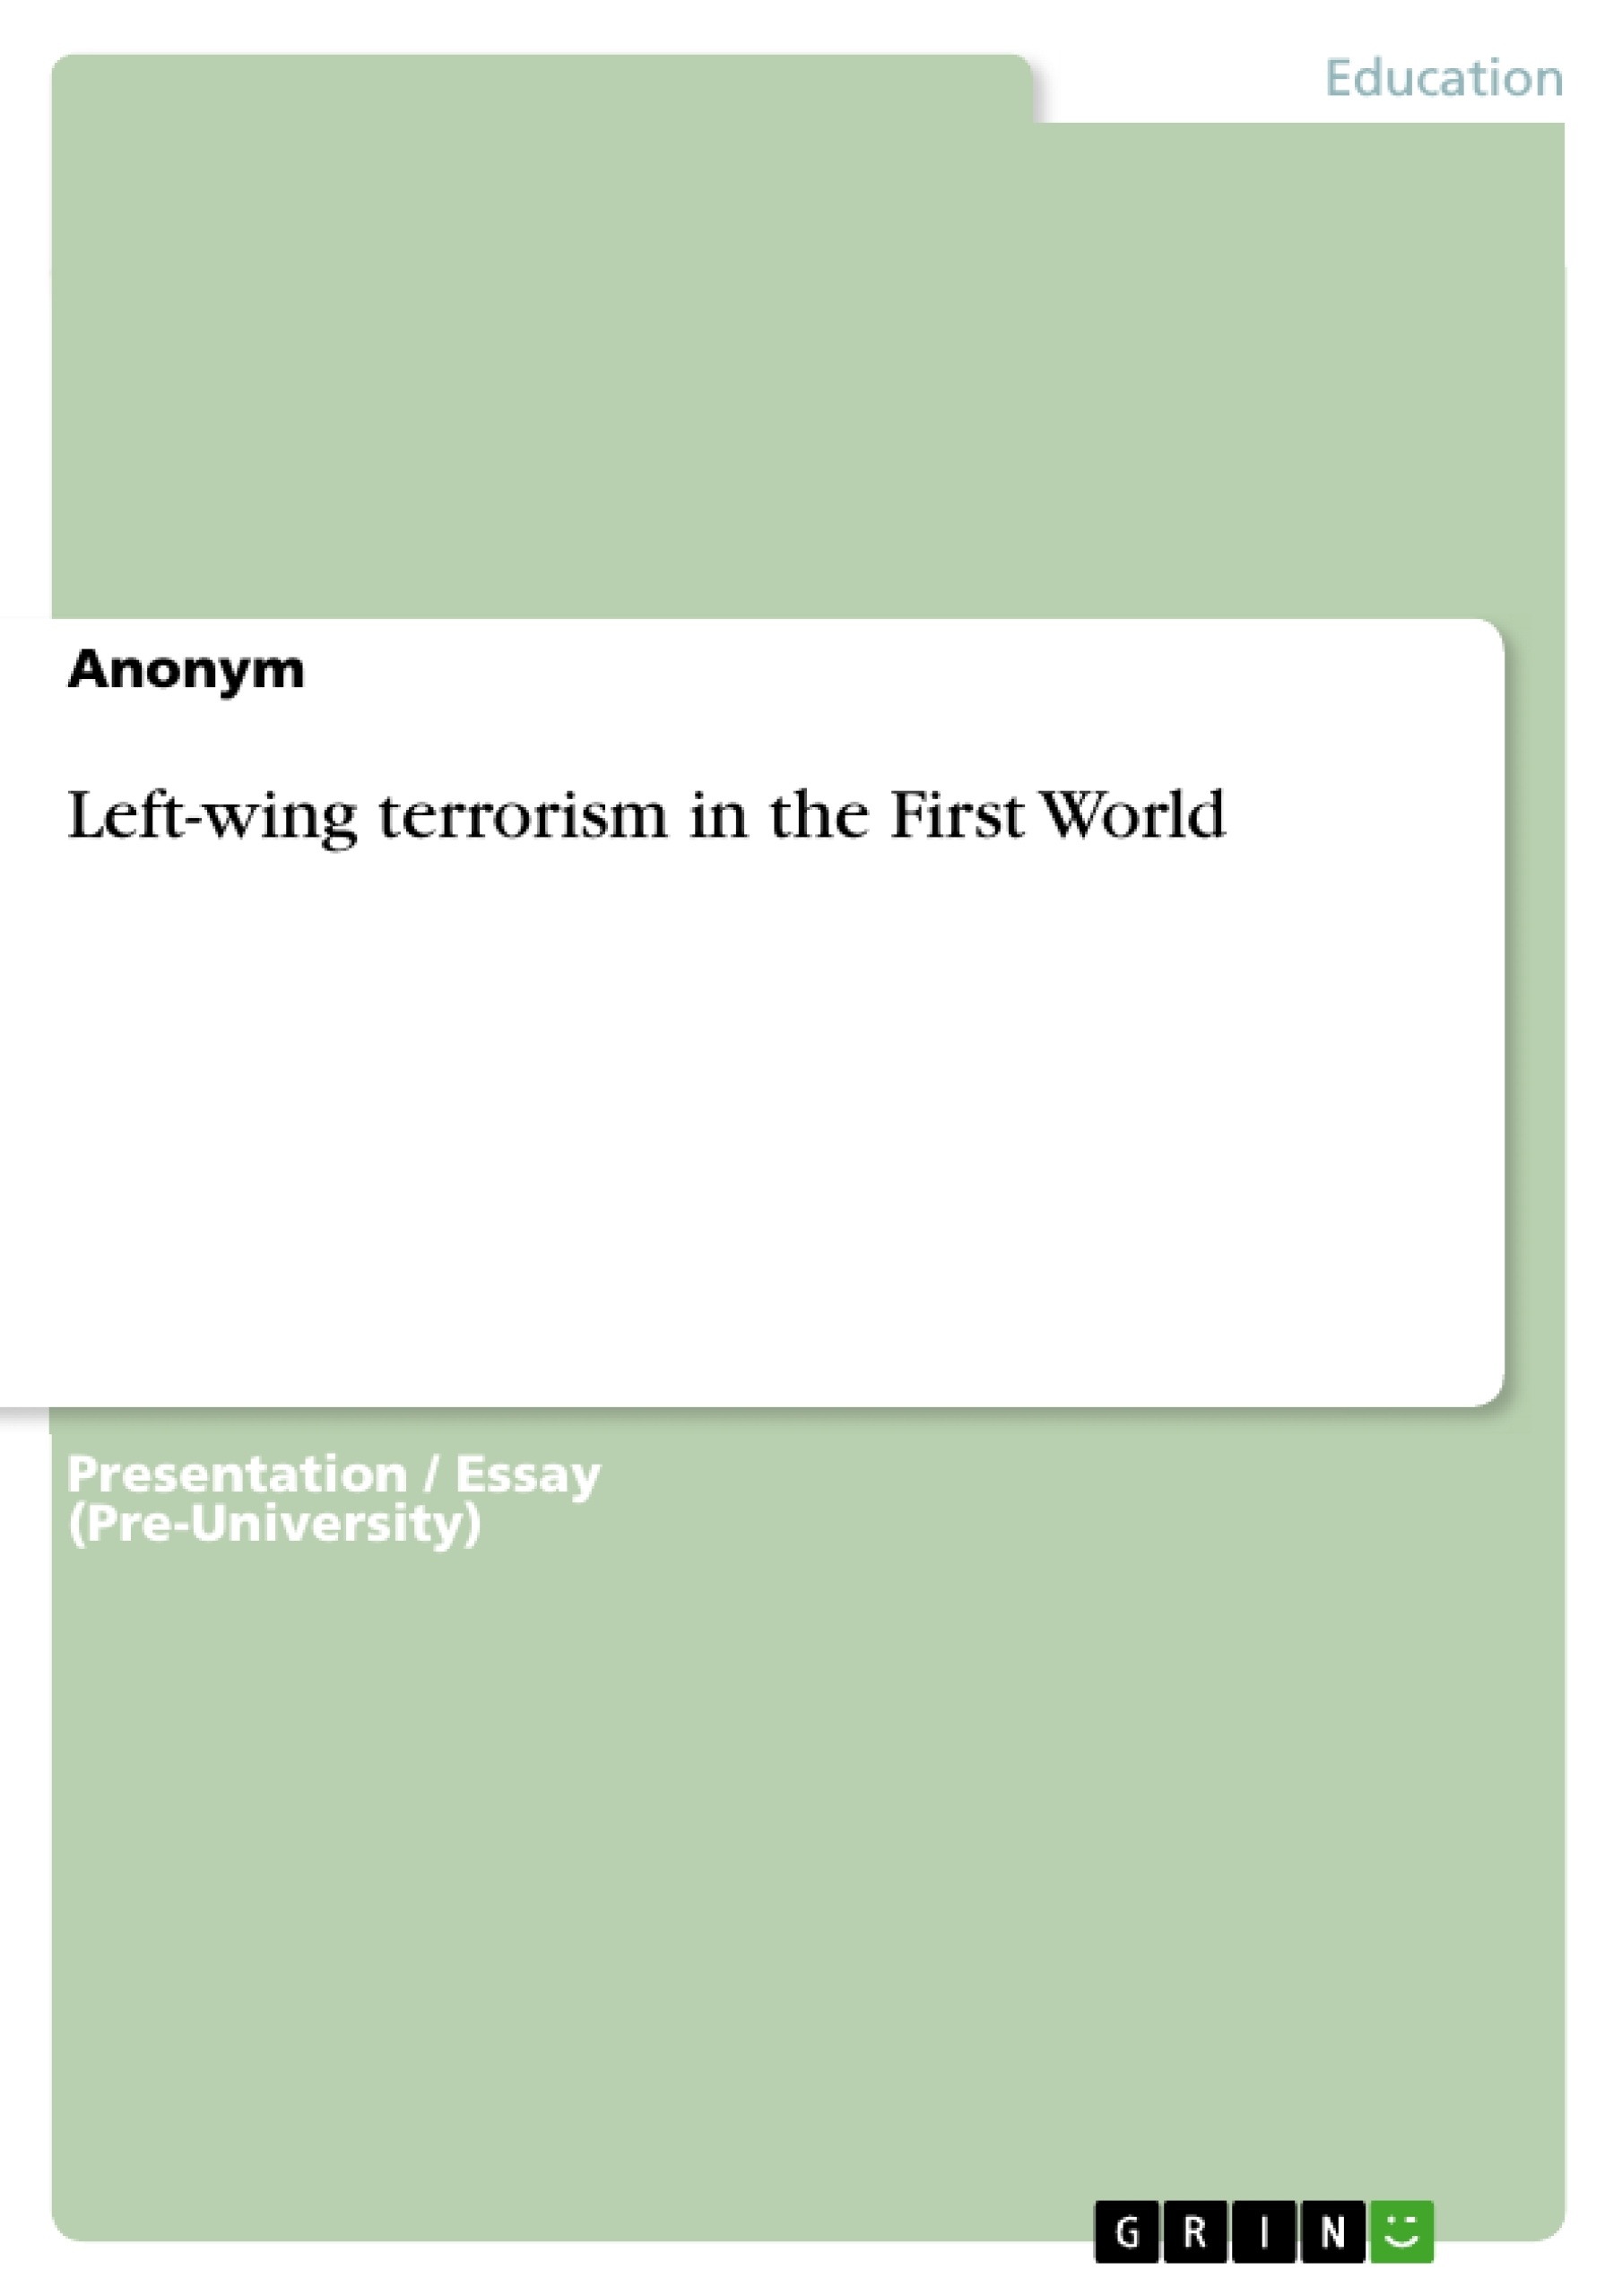 Title: Left-wing terrorism in the First World